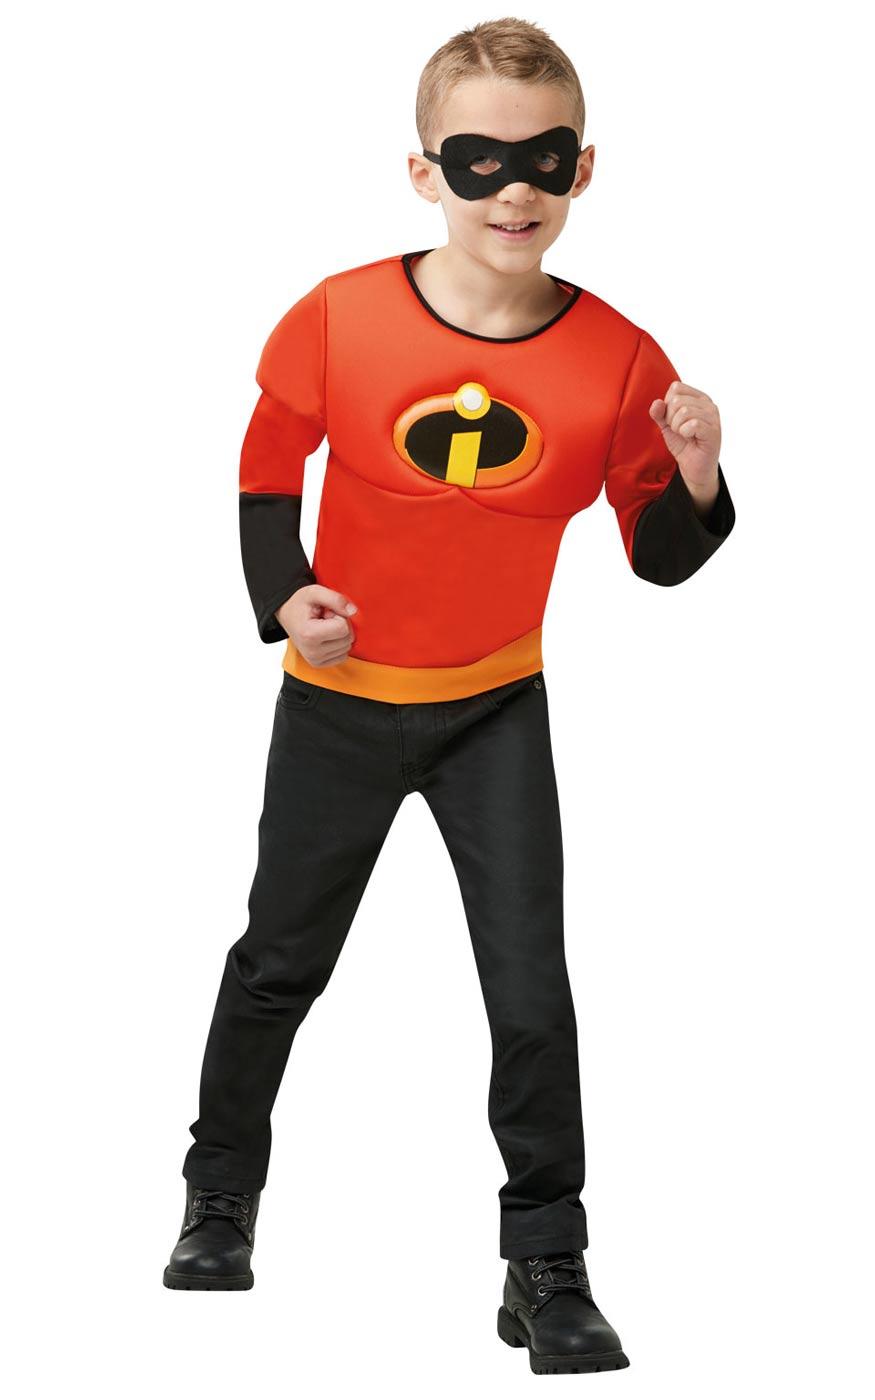 Incredibles 2 Muscle Top Costume for Children by Rubies 641392 available here at Karnival Costumes online party shop